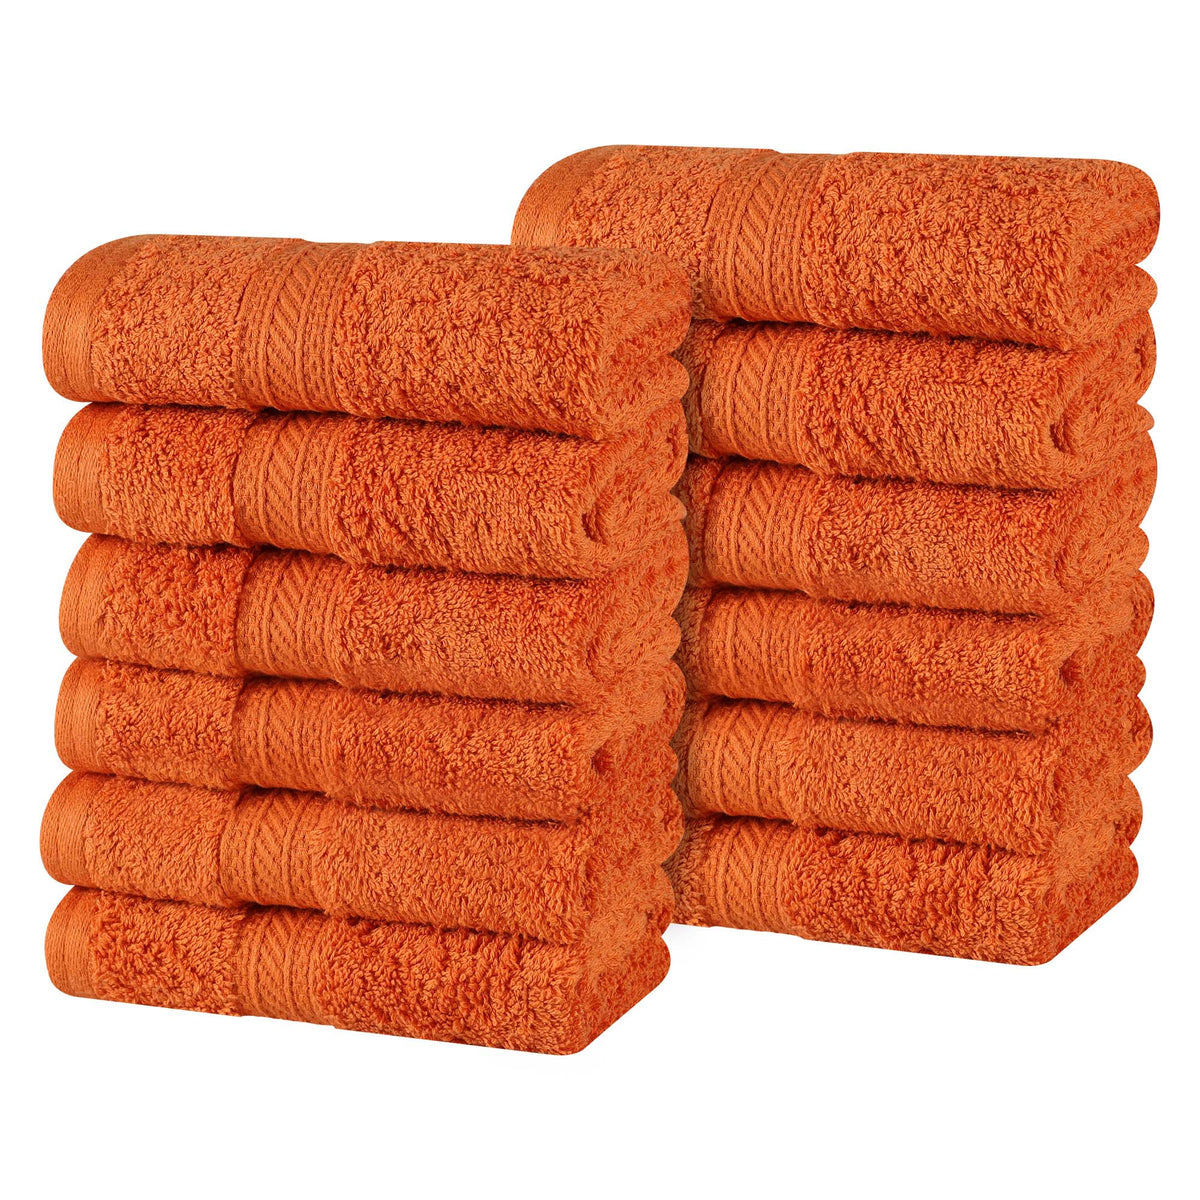 Atlas Combed Cotton Highly Absorbent Solid Face Towels / Washcloths Set of 12 - Sandstone